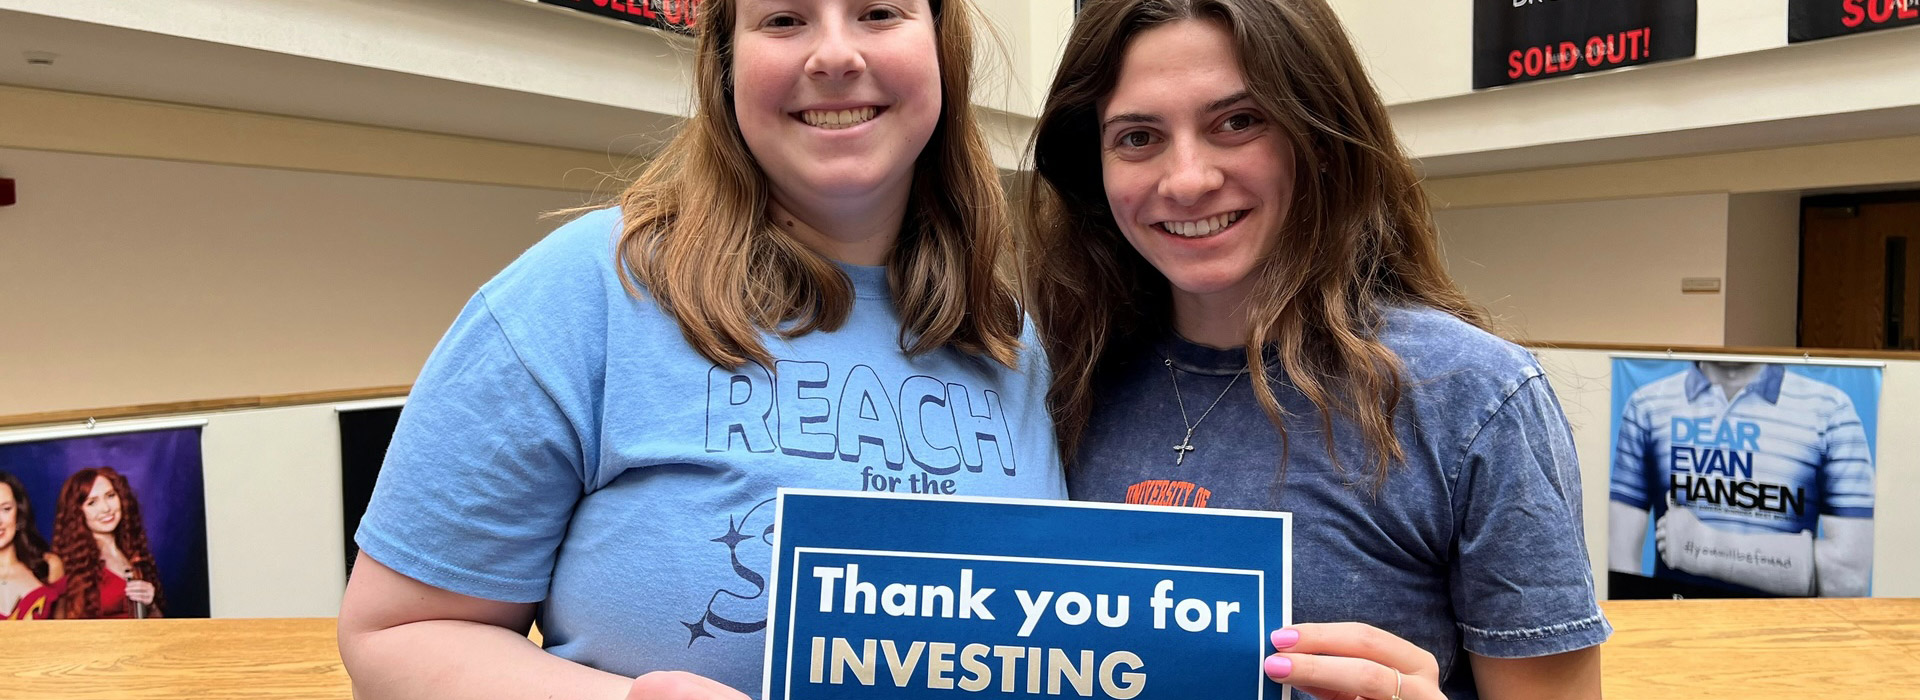 two students holding up a sign that reads "thank you for INVESTING in me"